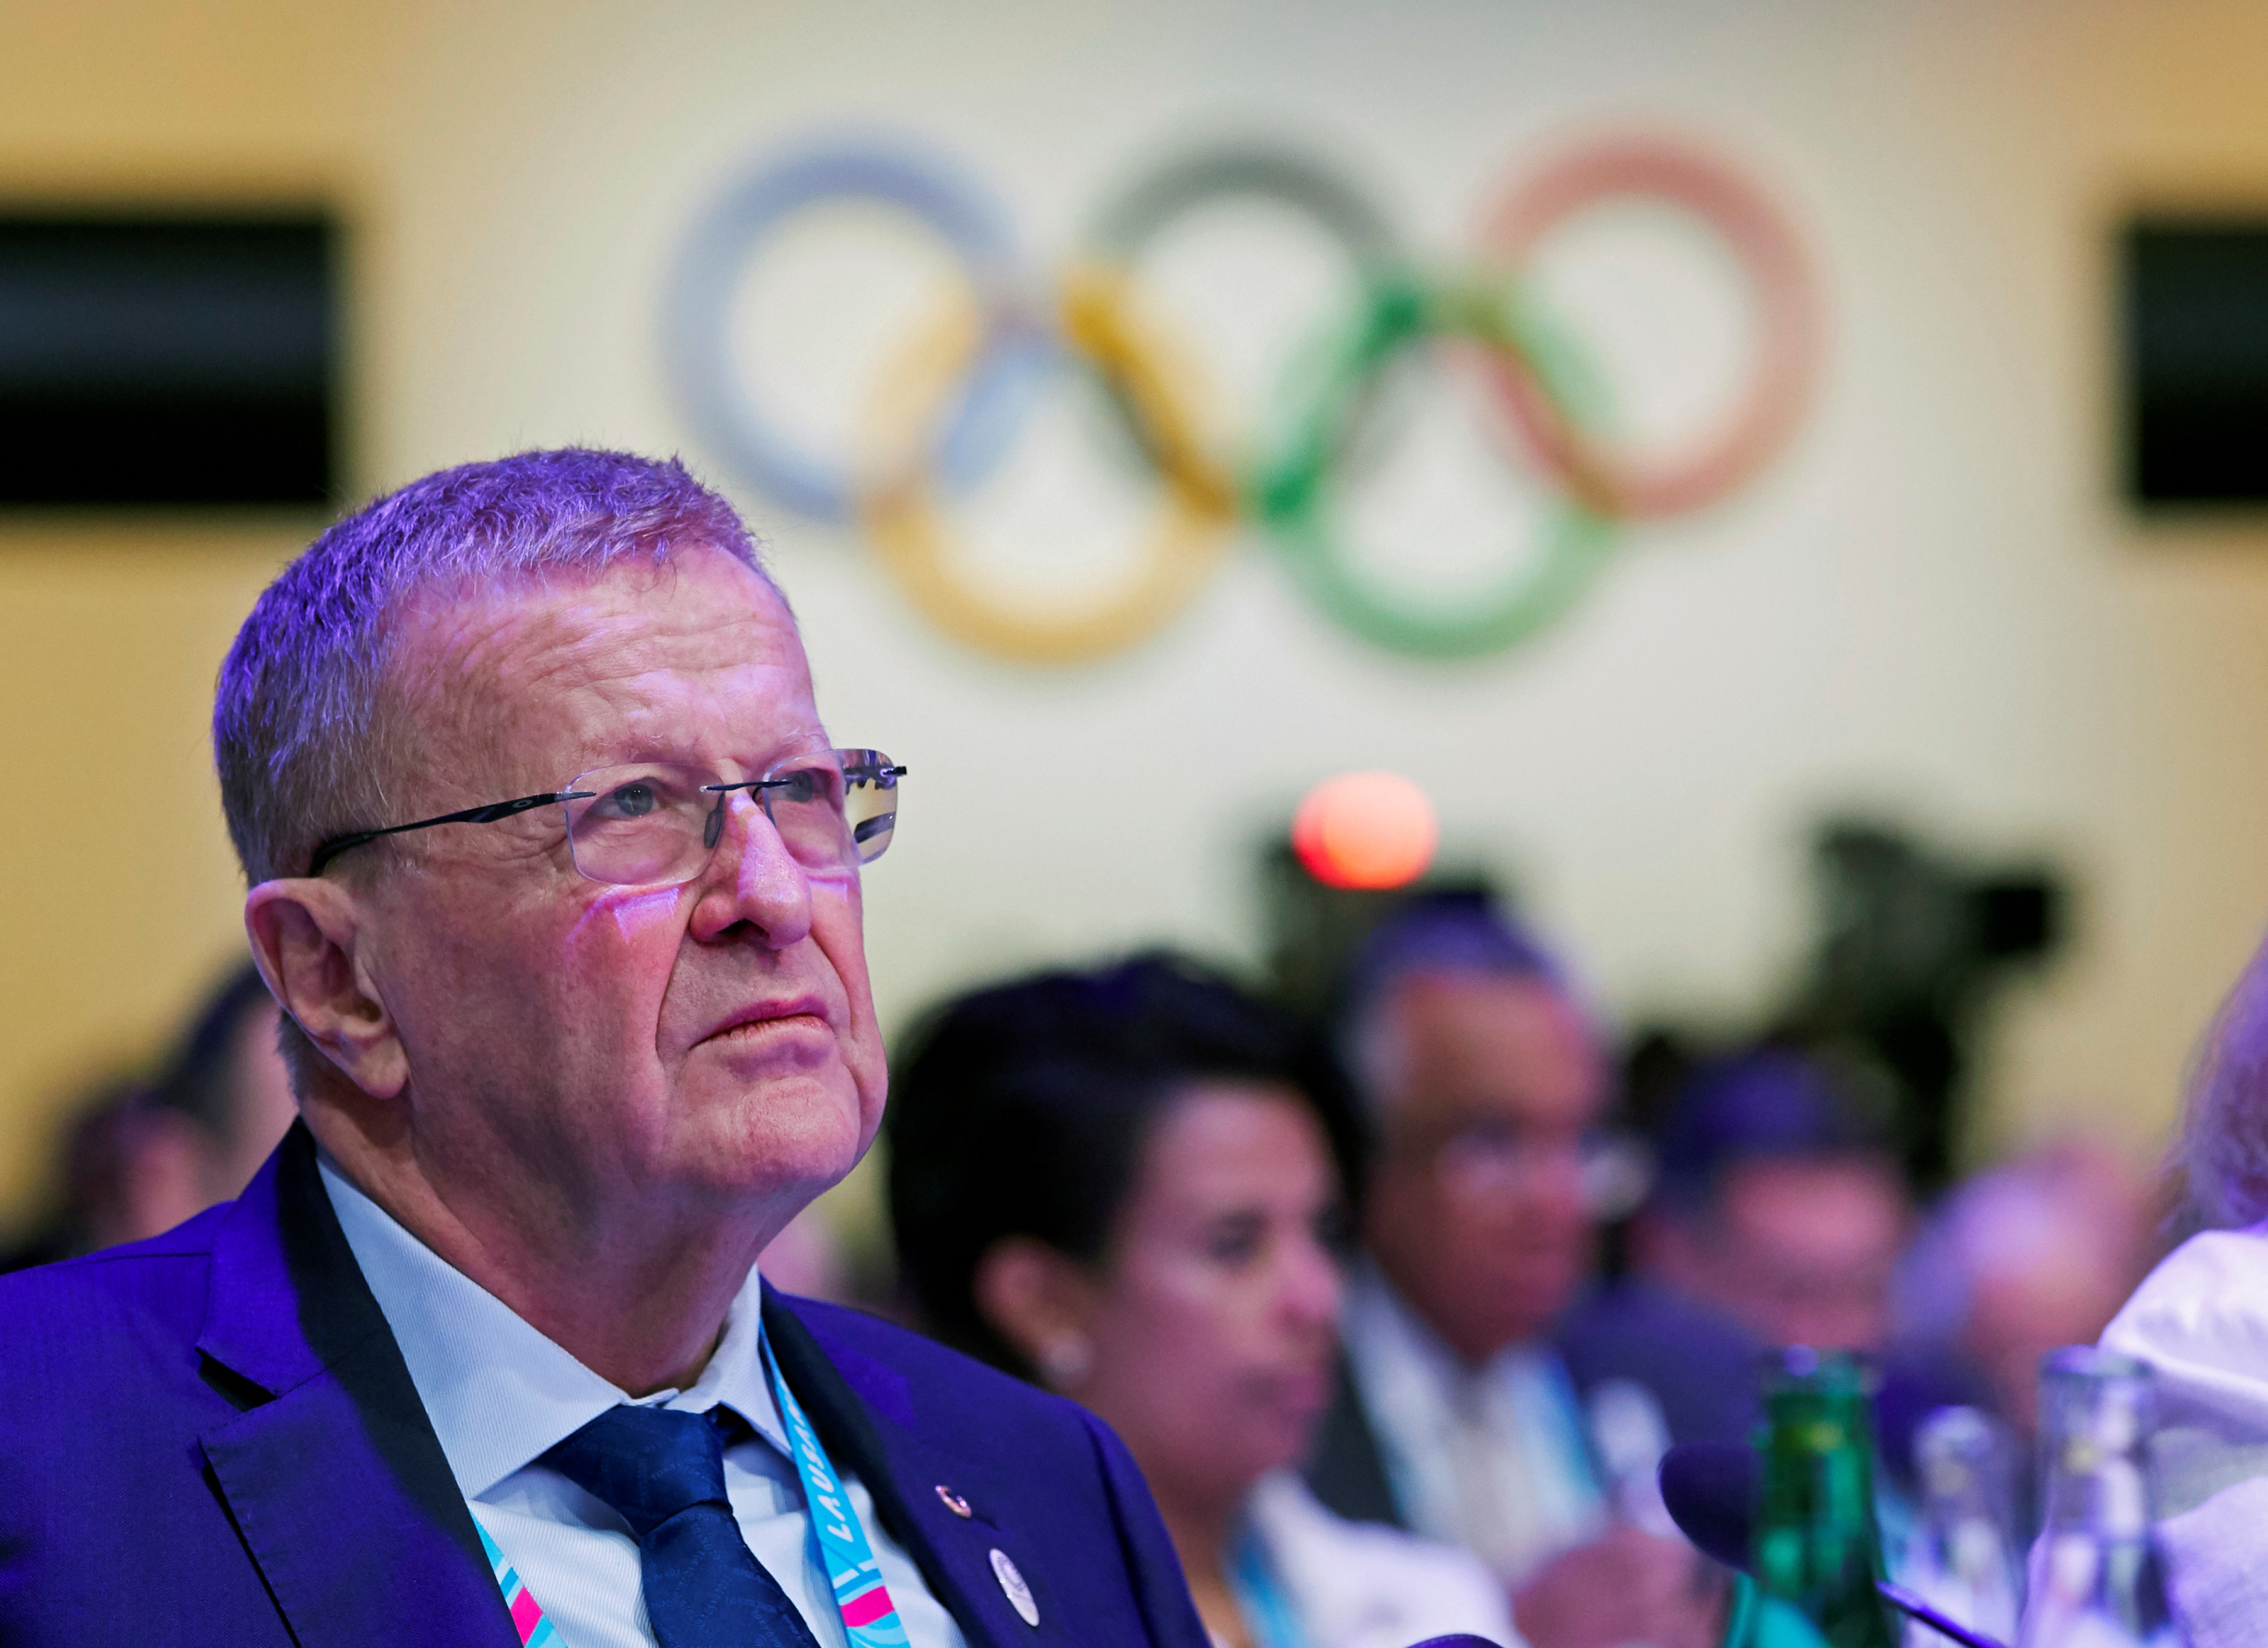 International Olympic Committee member John Coates attends the International Olympic Committee (IOC) 135th Session in Lausanne, Switzerland, January 10, 2020.  REUTERS/Denis Balibouse